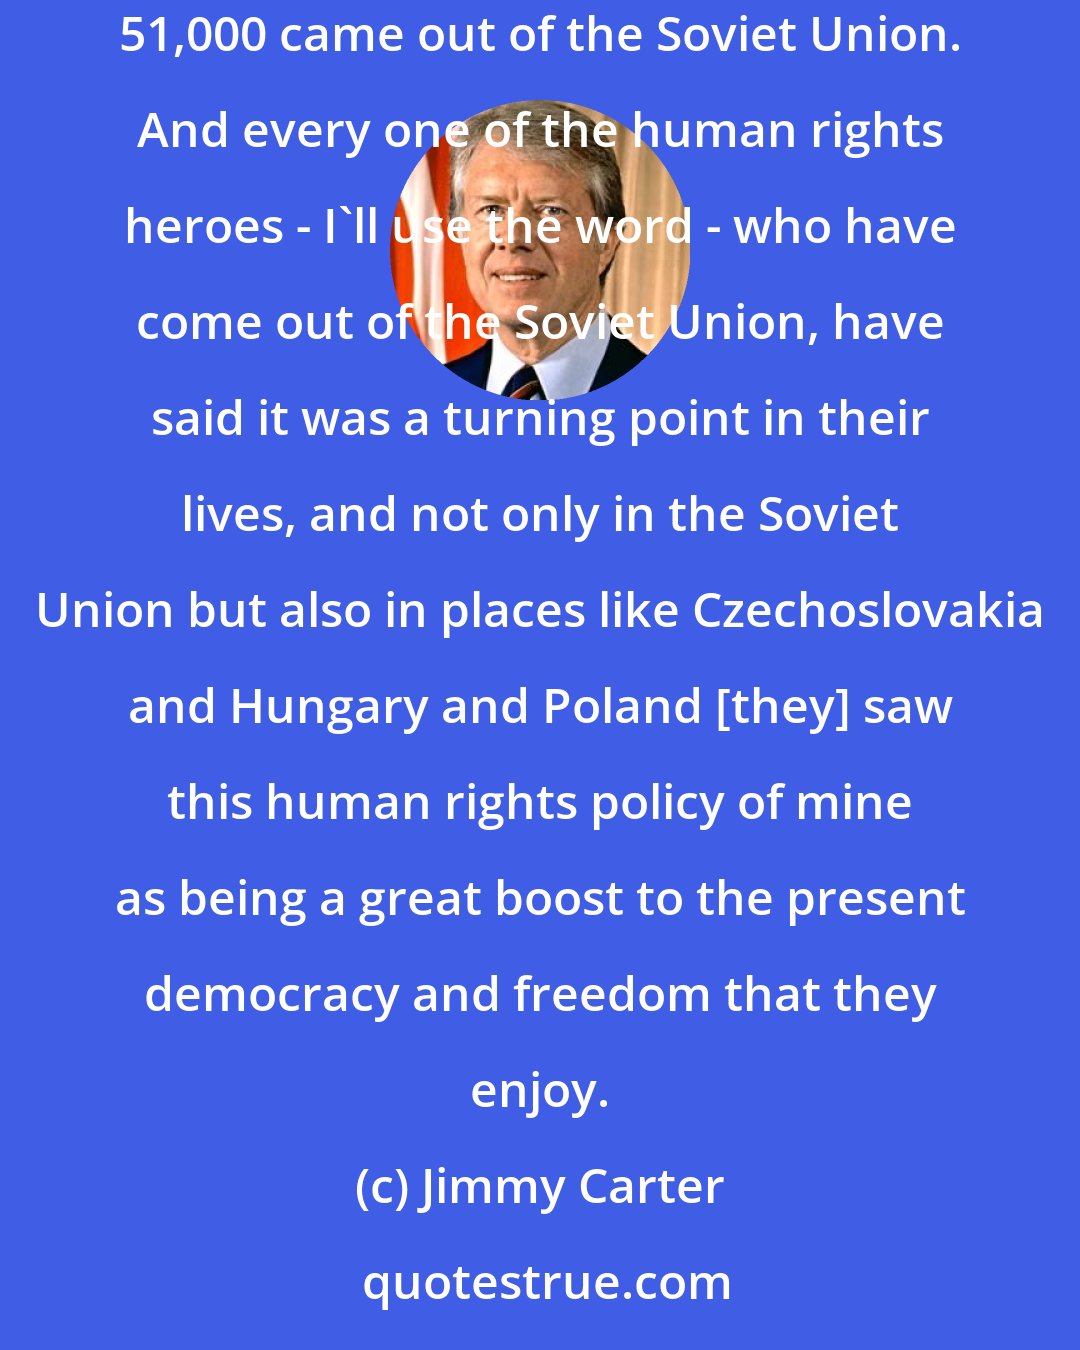 Jimmy Carter: The first year I was in office, only about 800 people came out of the Soviet Union, Jews. By the third year I was in office... second year, 1979, 51,000 came out of the Soviet Union. And every one of the human rights heroes - I'll use the word - who have come out of the Soviet Union, have said it was a turning point in their lives, and not only in the Soviet Union but also in places like Czechoslovakia and Hungary and Poland [they] saw this human rights policy of mine as being a great boost to the present democracy and freedom that they enjoy.